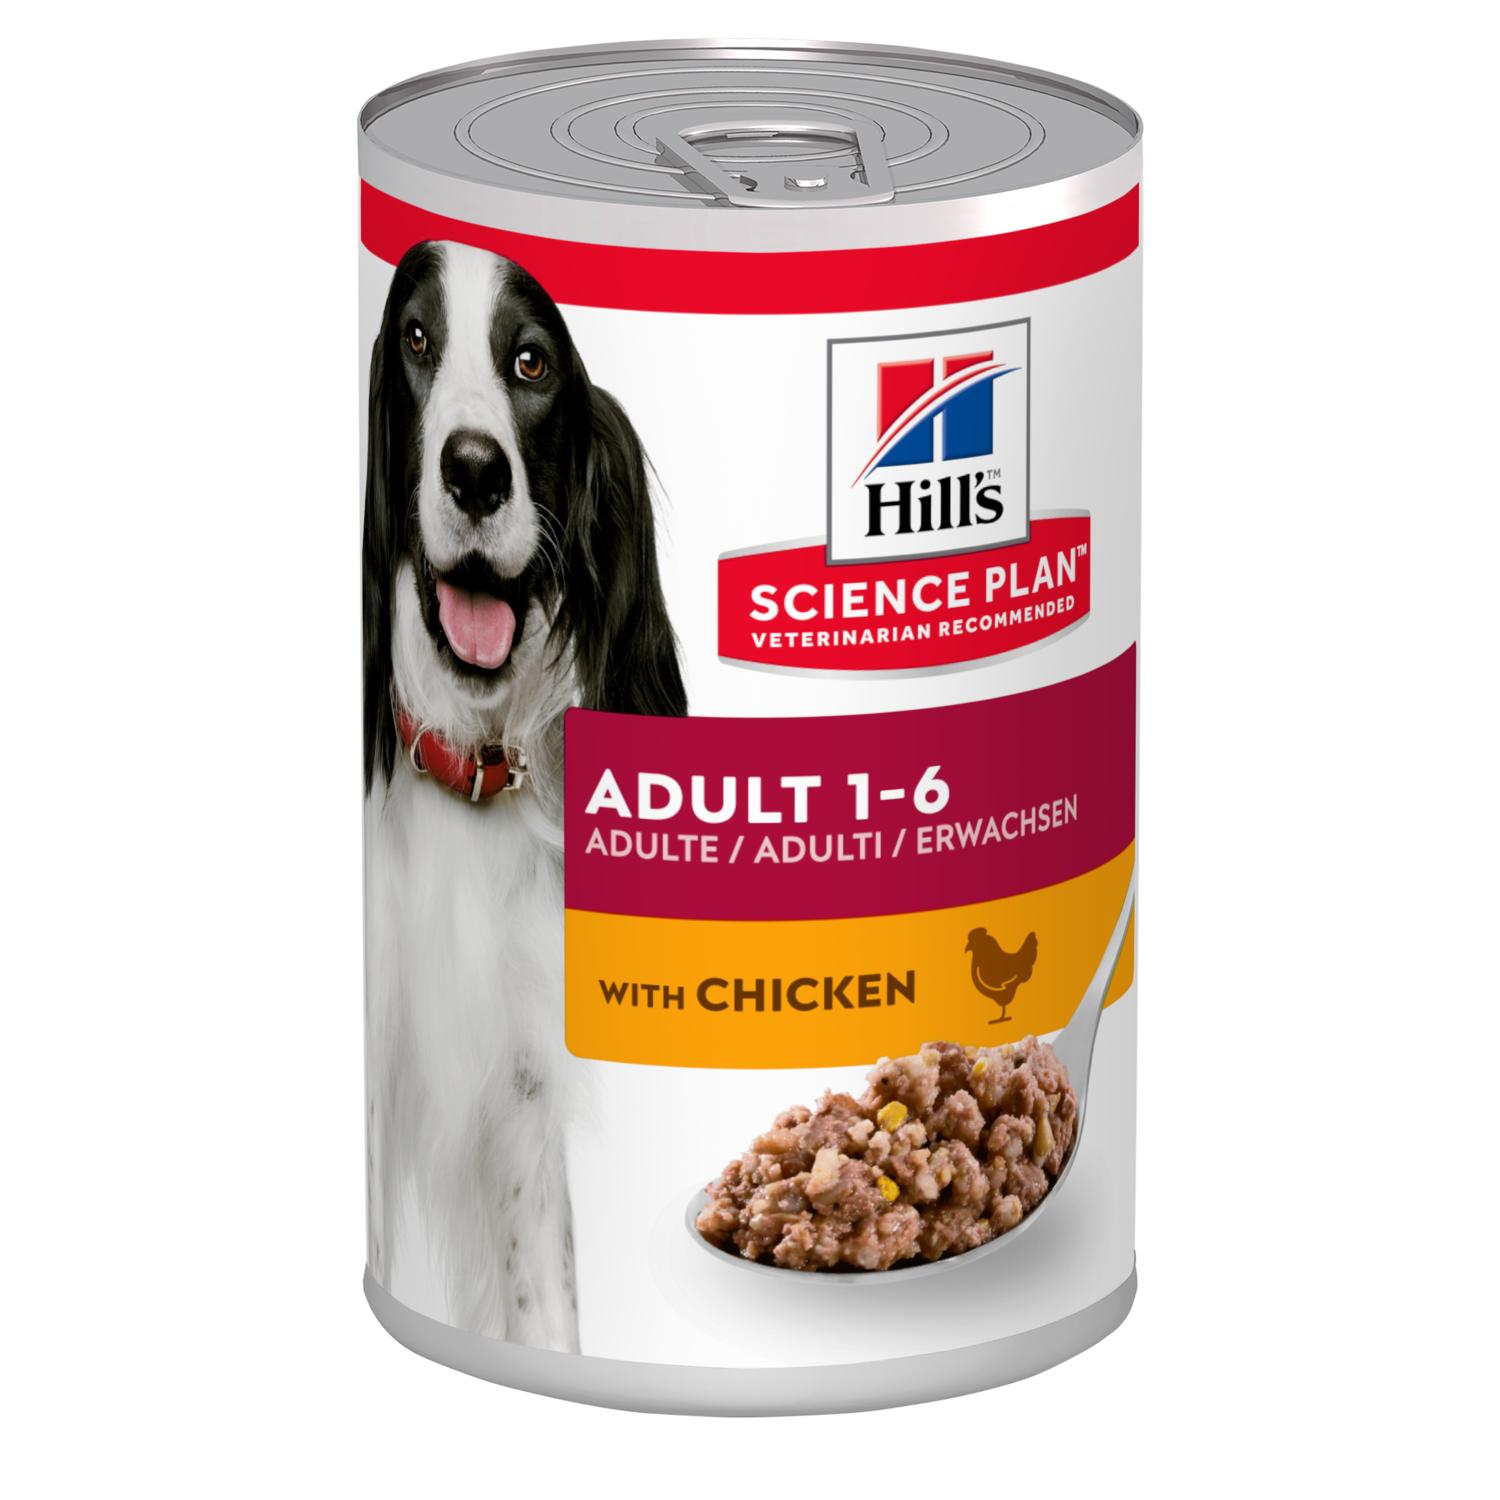 HILL'S SCIENCE PLAN Adult Dog Food with Chicken - Targa Pet Shop